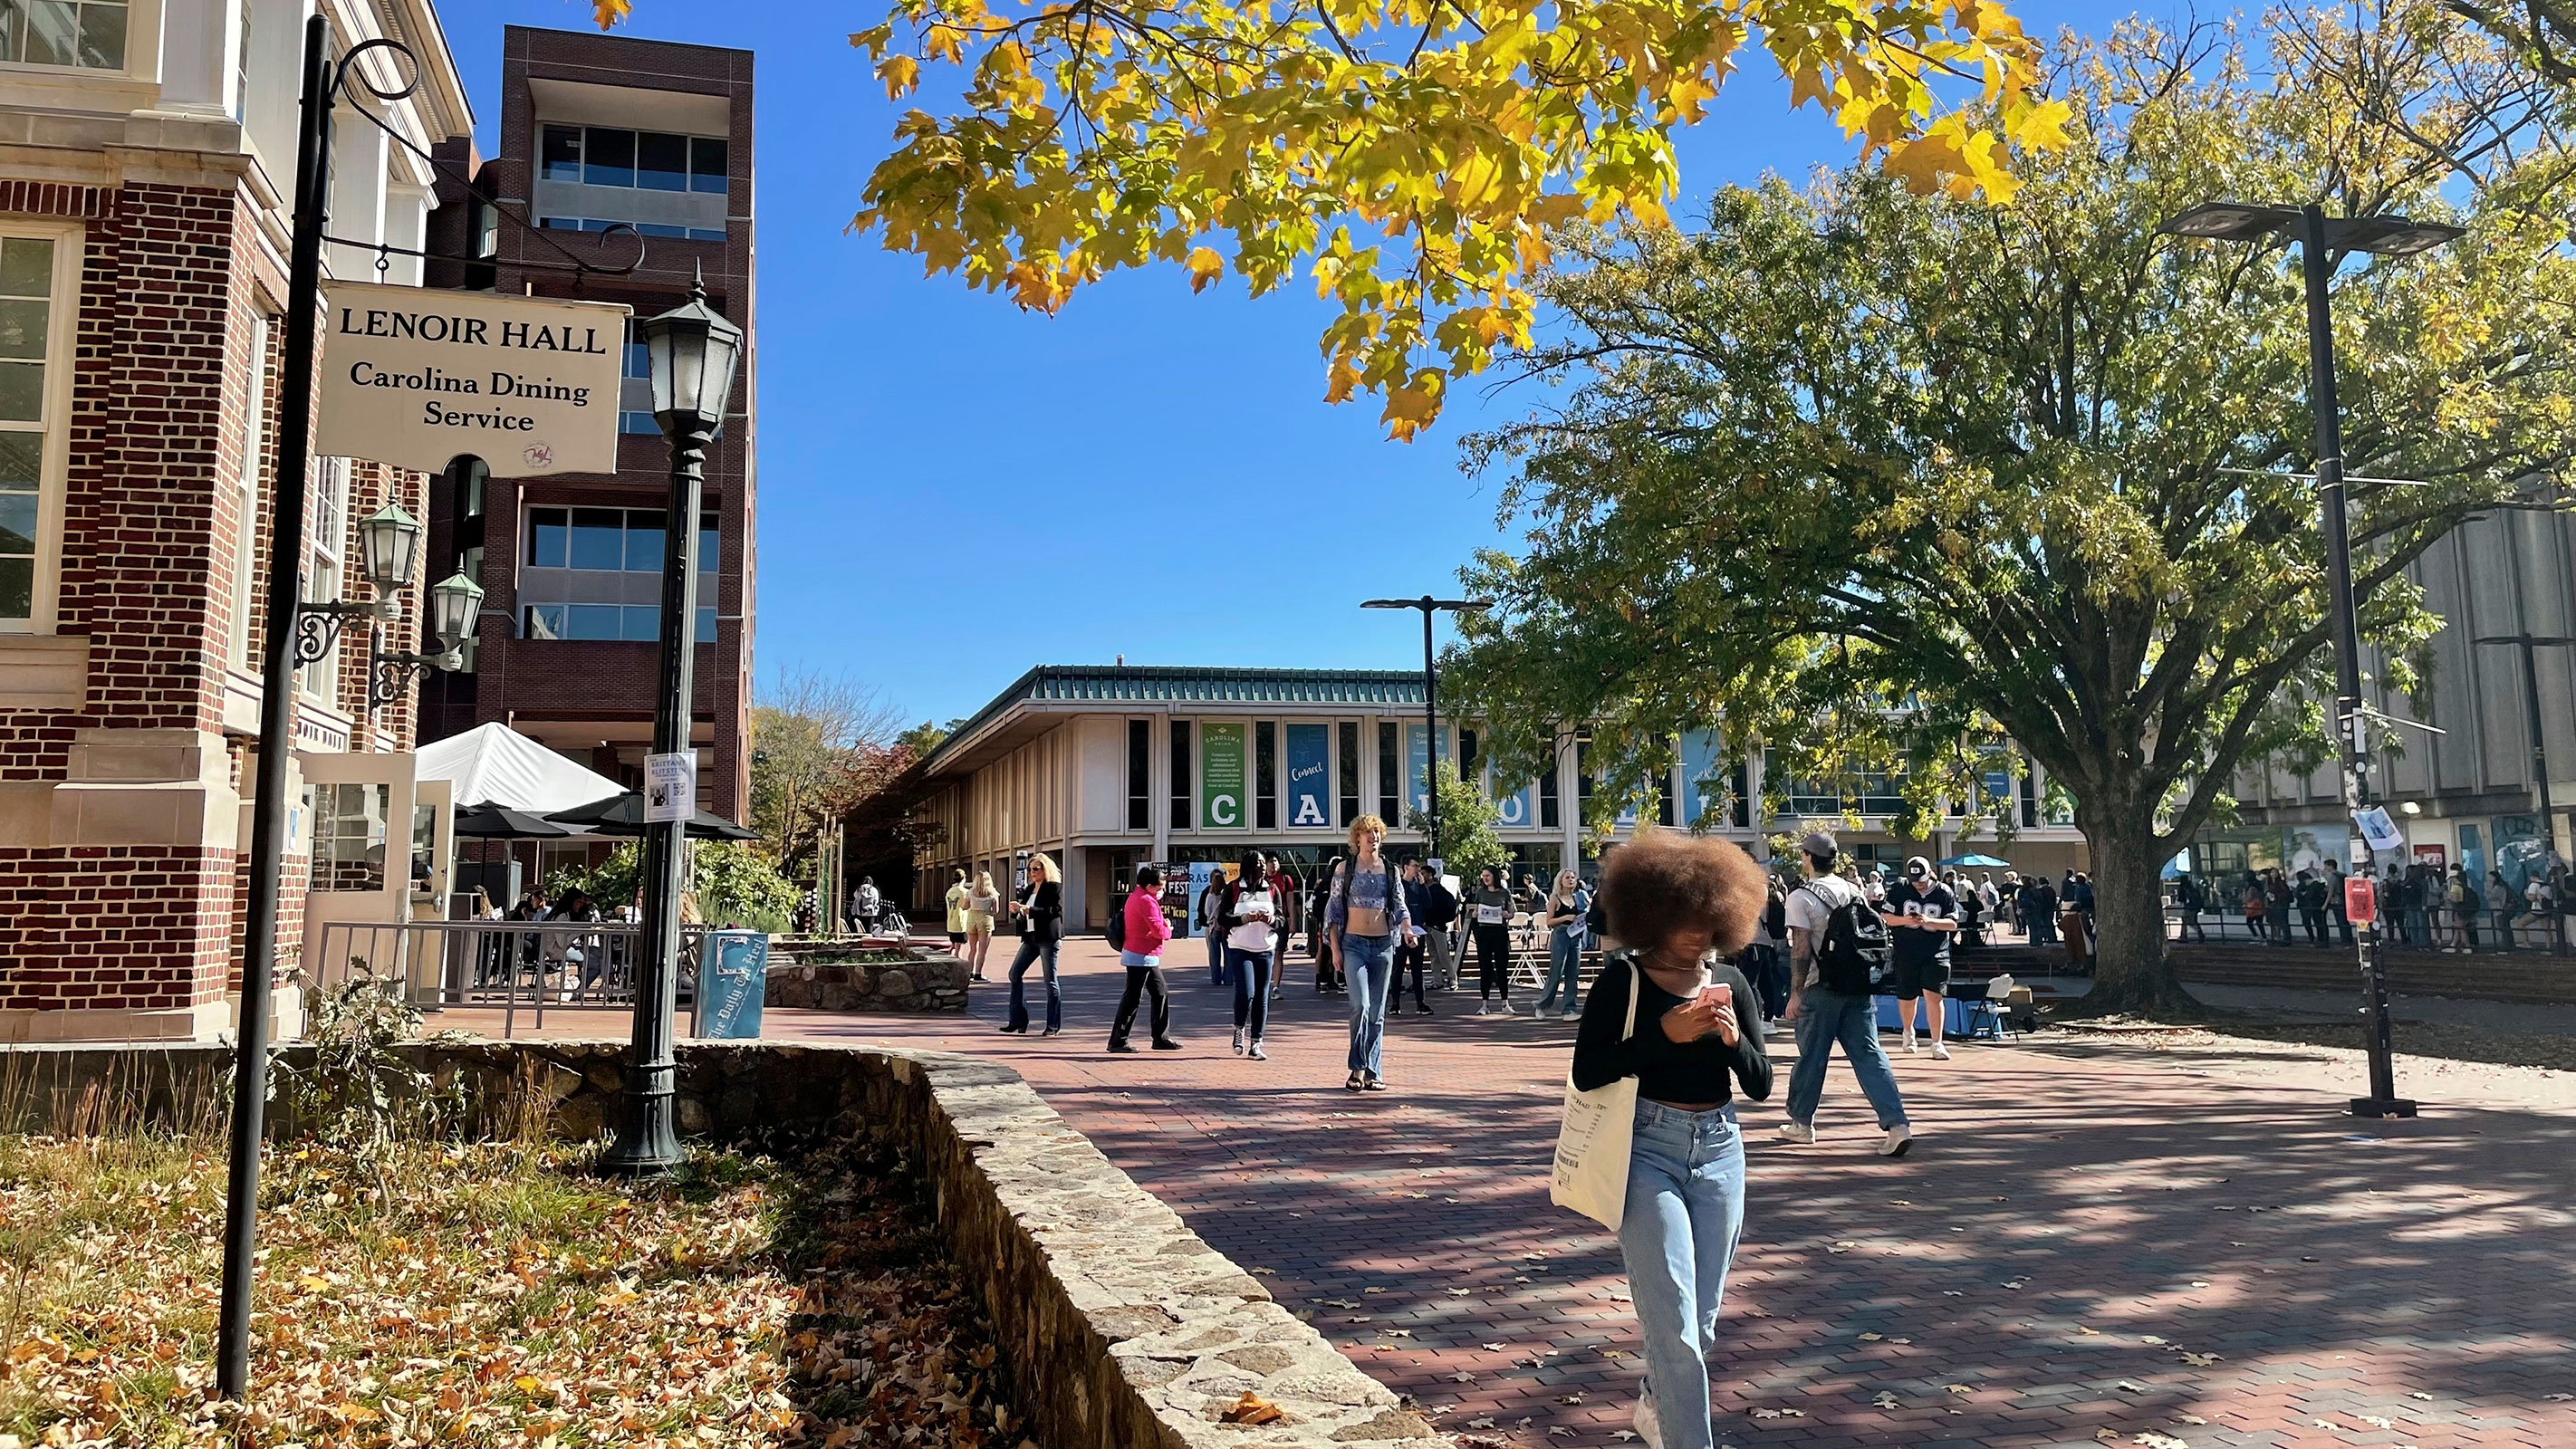 Students walk through the quad outside the student union at the University of North Carolina at Chapel Hill in October 2022.